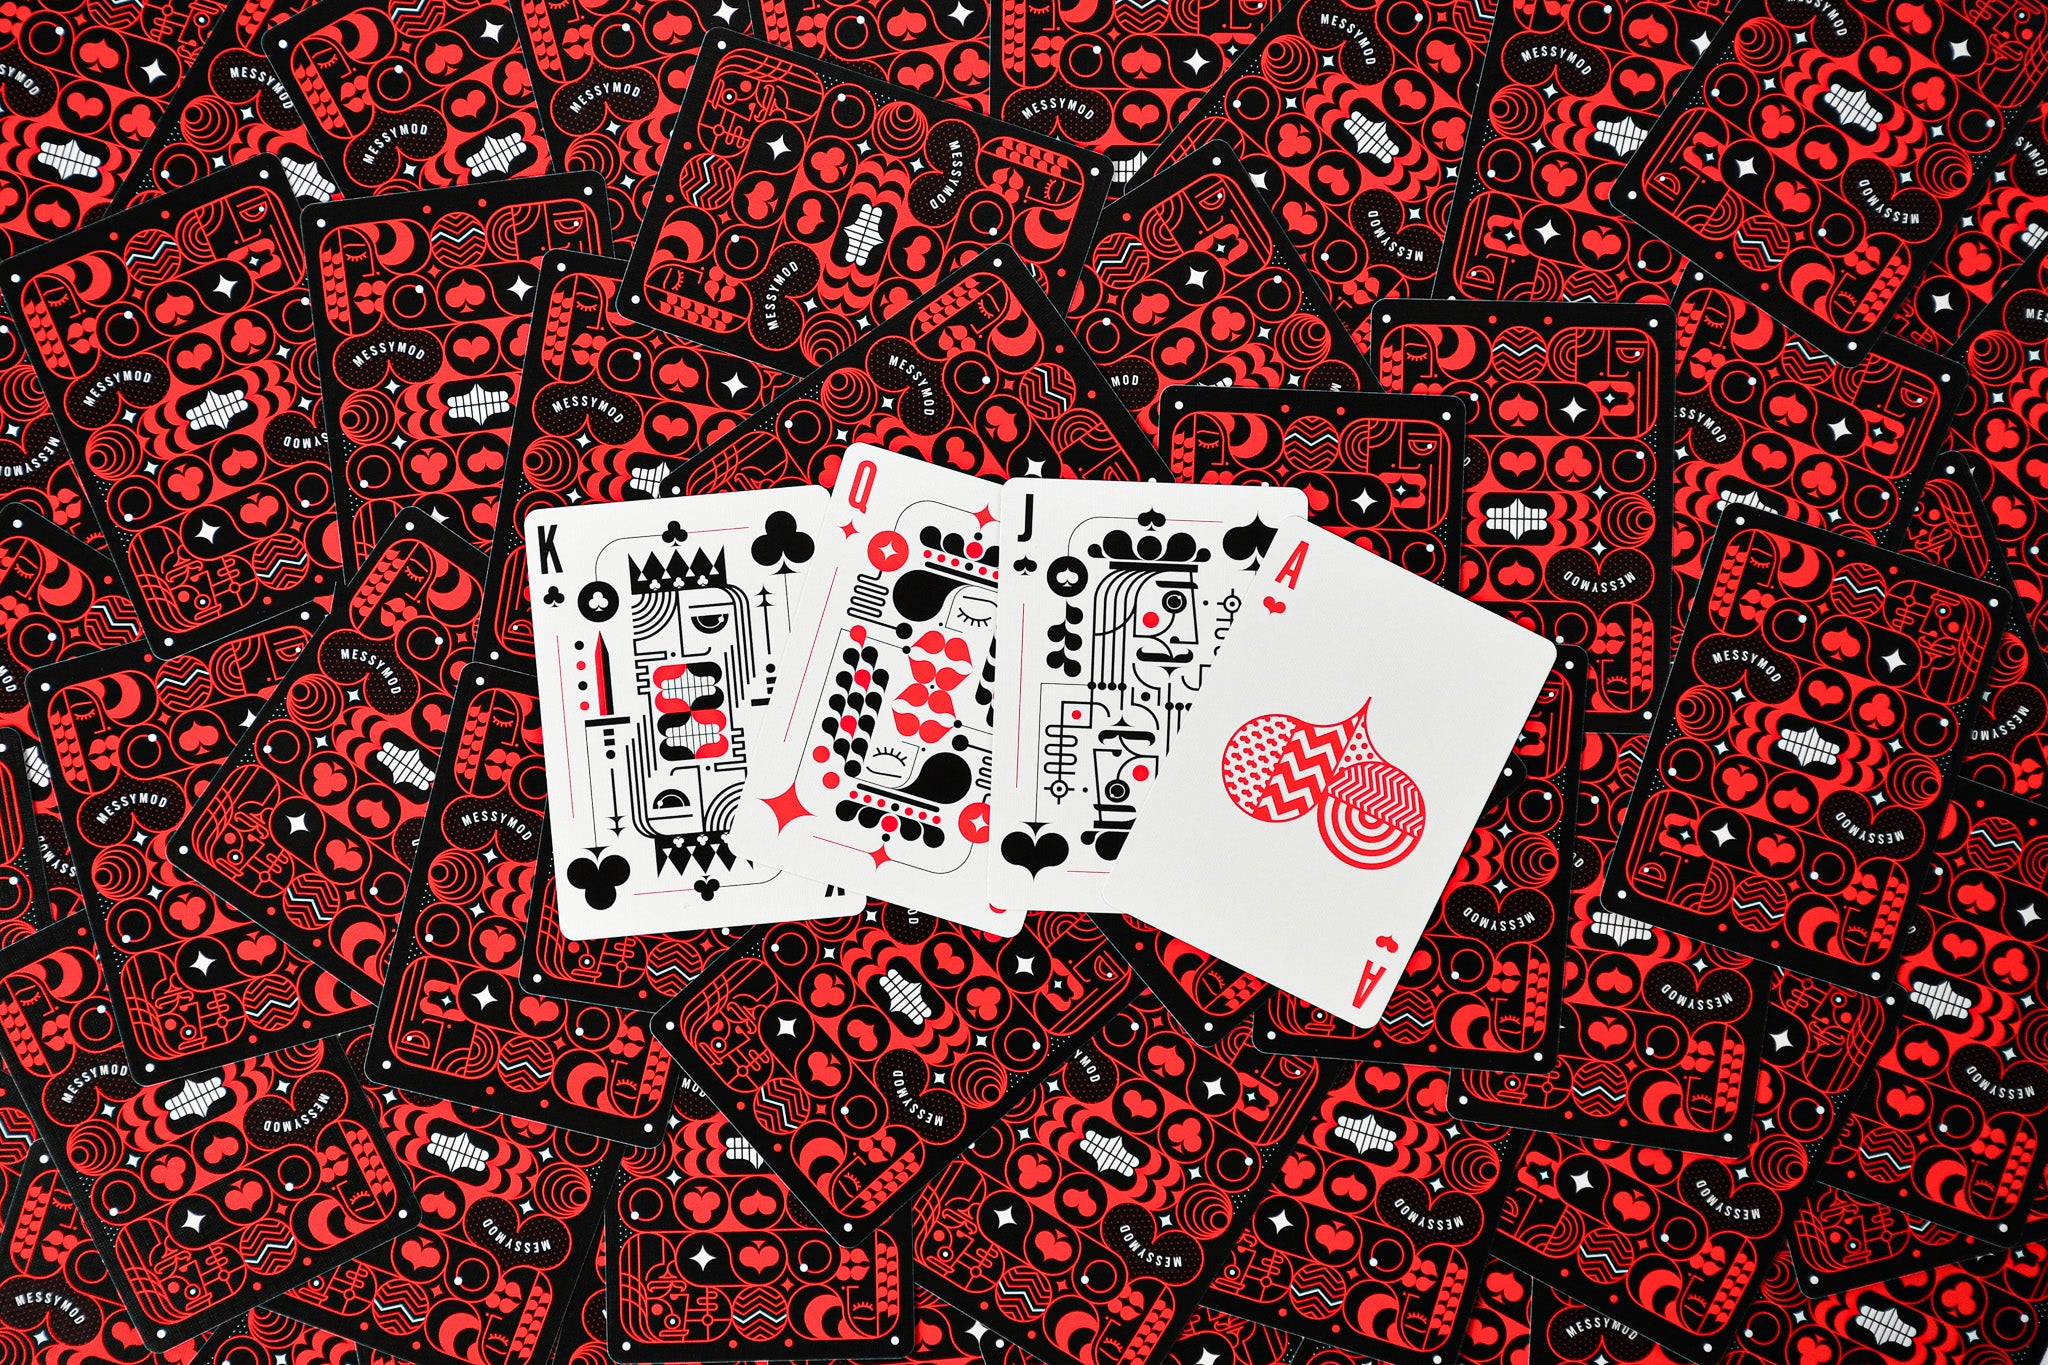 ART OF PLAY - PLAYING CARDS - MESSYMOD EDITION 2